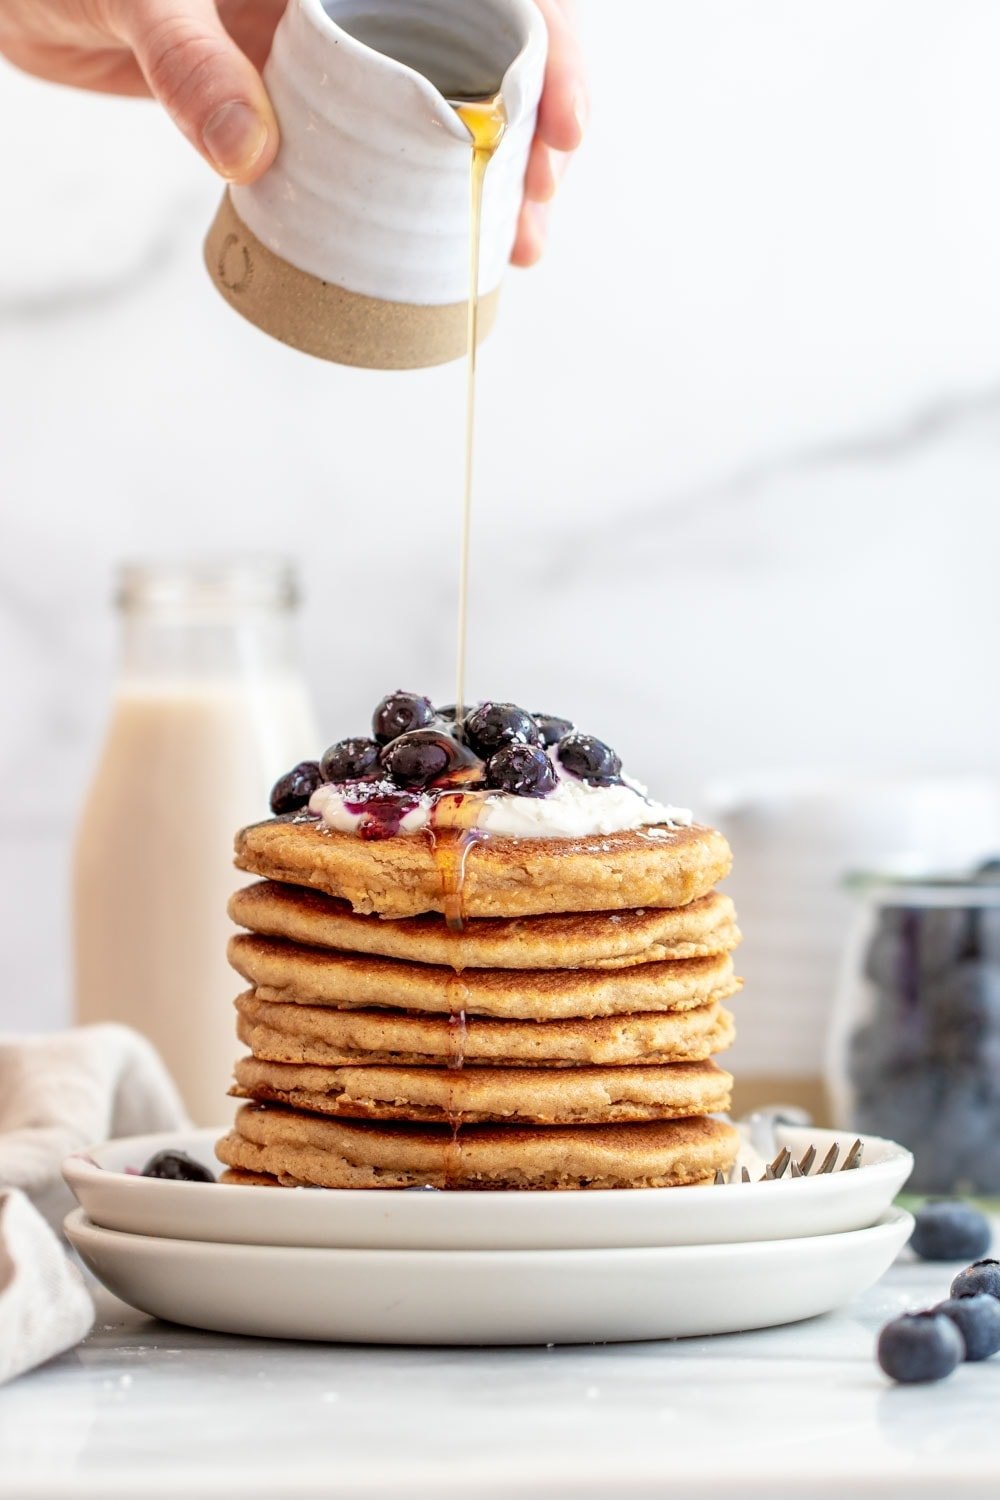 pouring maple syrup on a tall stack of gluten free pancakes.